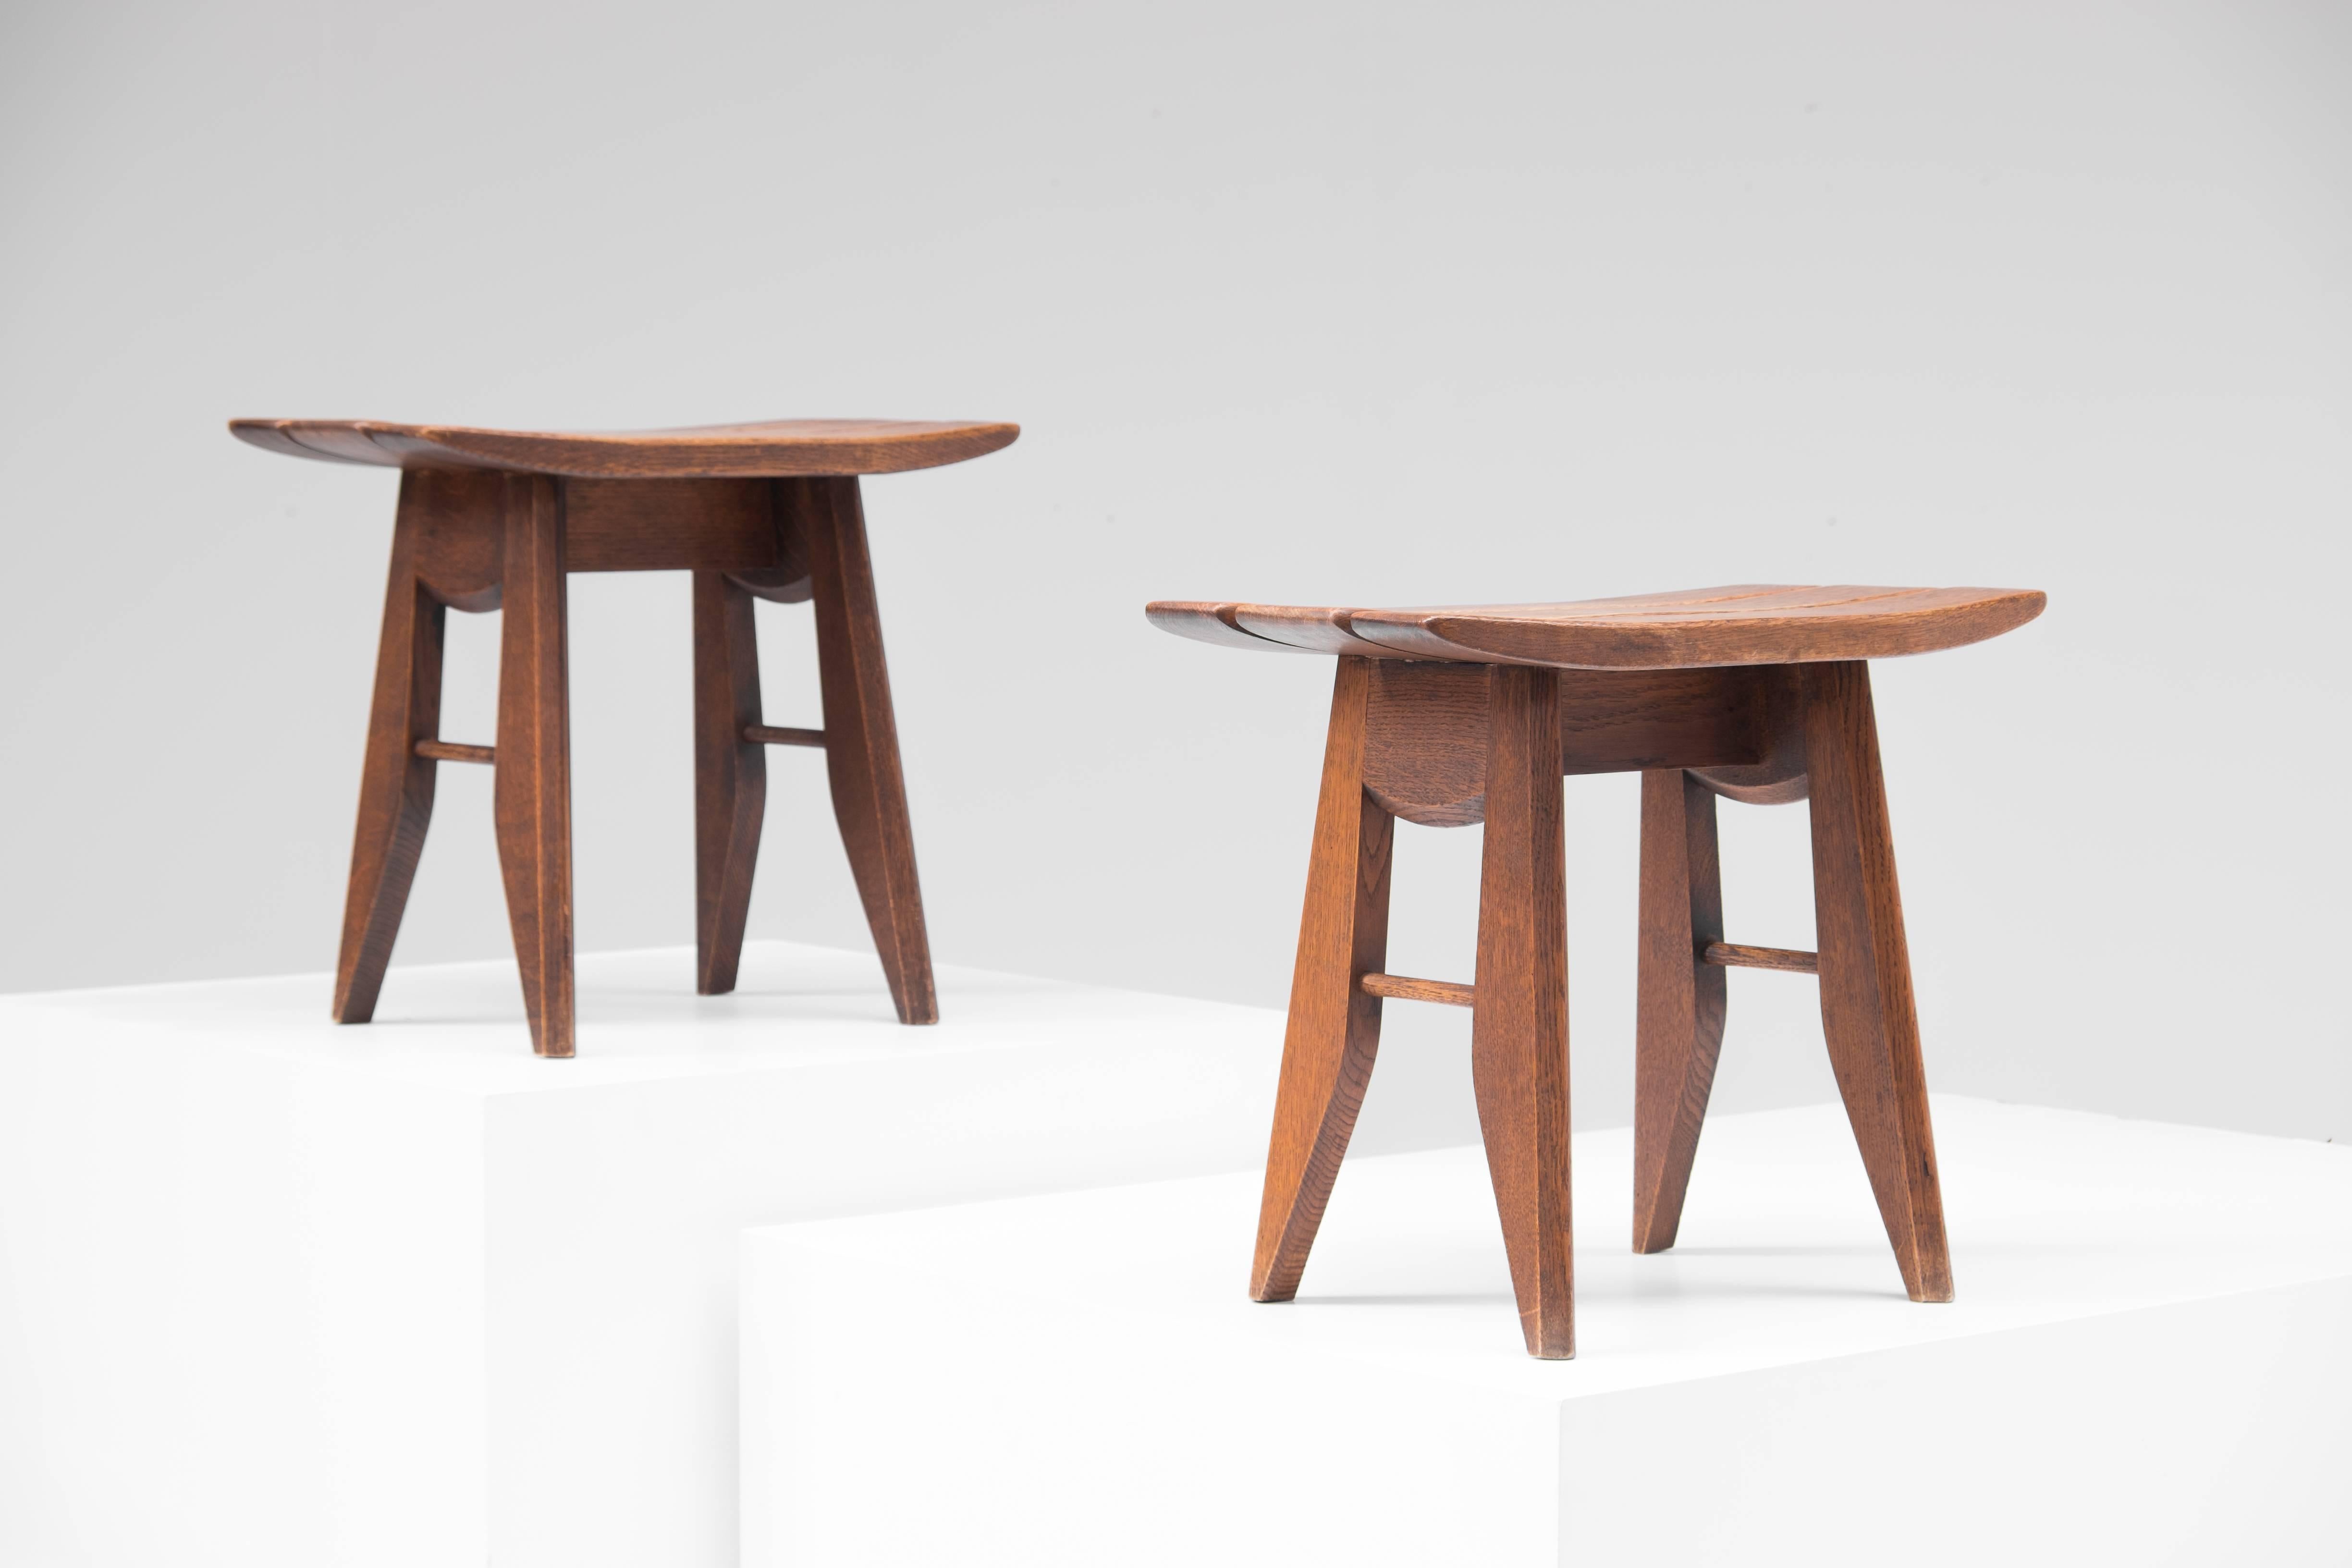 Pair of oak stools with a beautiful overall patina, by Guillerme et Chambron for Votre Maison, produced in France during the 1960s.

These stools have a japonesque inspired shape, strongly resembling the architecture of a Nakayama Torii gate. With